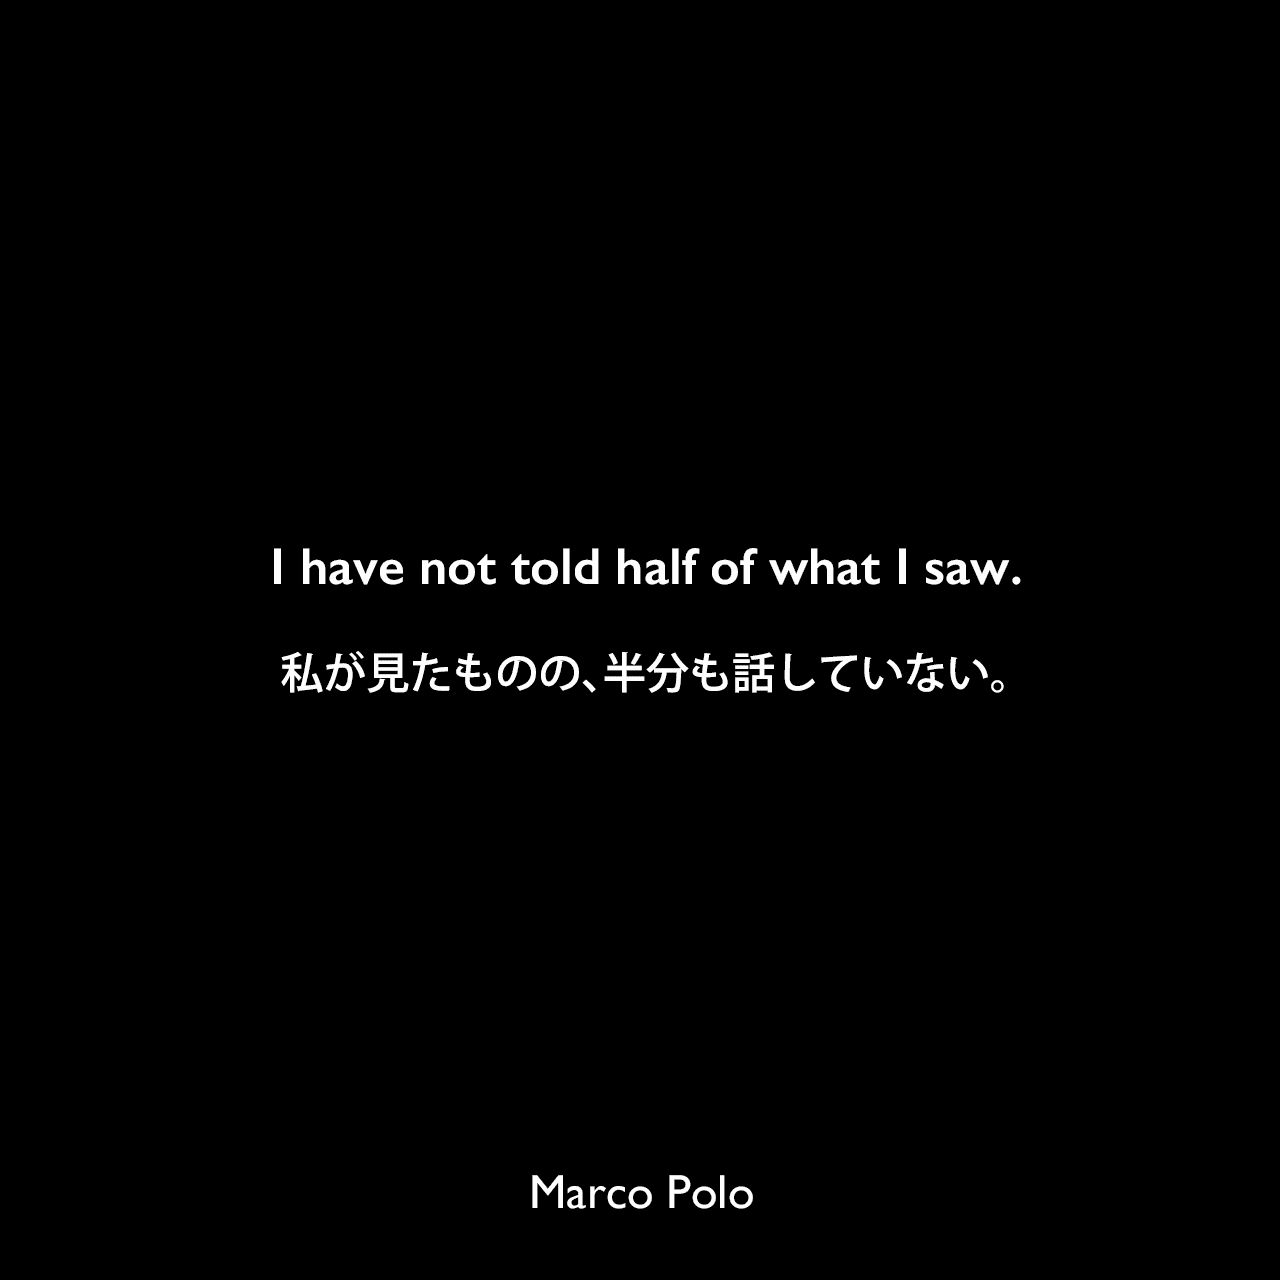 I have not told half of what I saw.私が見たものの、半分も話していない。Marco Polo